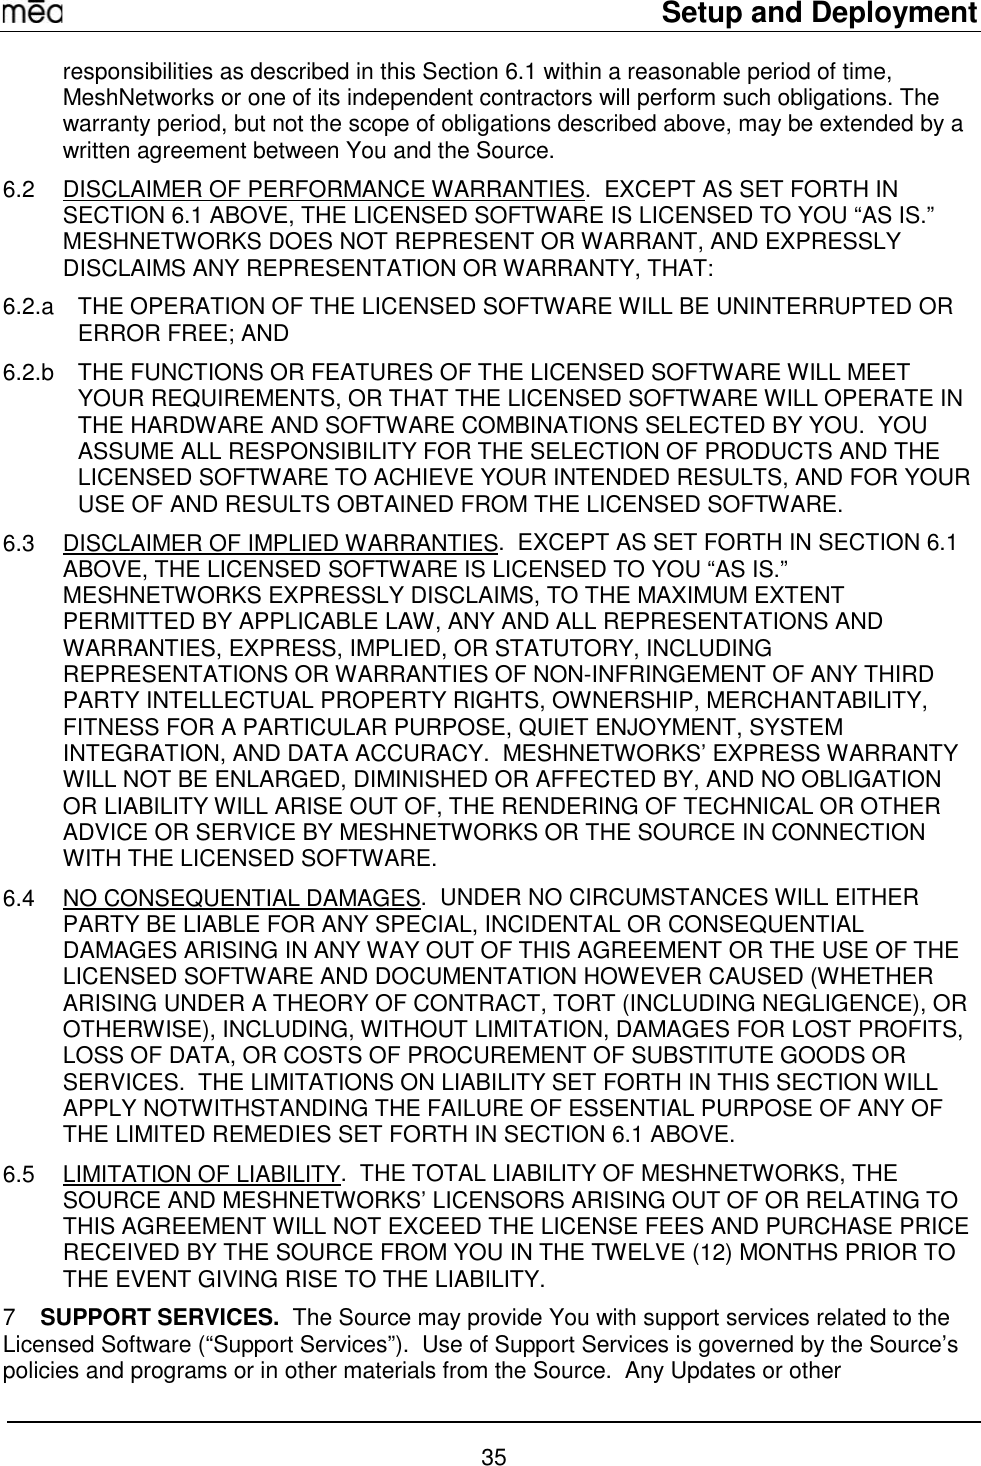     Setup and Deployment  35 responsibilities as described in this Section 6.1 within a reasonable period of time, MeshNetworks or one of its independent contractors will perform such obligations. The warranty period, but not the scope of obligations described above, may be extended by a written agreement between You and the Source. 6.2  DISCLAIMER OF PERFORMANCE WARRANTIES.  EXCEPT AS SET FORTH IN SECTION 6.1 ABOVE, THE LICENSED SOFTWARE IS LICENSED TO YOU “AS IS.”  MESHNETWORKS DOES NOT REPRESENT OR WARRANT, AND EXPRESSLY DISCLAIMS ANY REPRESENTATION OR WARRANTY, THAT: 6.2.a  THE OPERATION OF THE LICENSED SOFTWARE WILL BE UNINTERRUPTED OR ERROR FREE; AND 6.2.b  THE FUNCTIONS OR FEATURES OF THE LICENSED SOFTWARE WILL MEET YOUR REQUIREMENTS, OR THAT THE LICENSED SOFTWARE WILL OPERATE IN THE HARDWARE AND SOFTWARE COMBINATIONS SELECTED BY YOU.  YOU ASSUME ALL RESPONSIBILITY FOR THE SELECTION OF PRODUCTS AND THE LICENSED SOFTWARE TO ACHIEVE YOUR INTENDED RESULTS, AND FOR YOUR USE OF AND RESULTS OBTAINED FROM THE LICENSED SOFTWARE.  6.3  DISCLAIMER OF IMPLIED WARRANTIES.  EXCEPT AS SET FORTH IN SECTION 6.1 ABOVE, THE LICENSED SOFTWARE IS LICENSED TO YOU “AS IS.”  MESHNETWORKS EXPRESSLY DISCLAIMS, TO THE MAXIMUM EXTENT PERMITTED BY APPLICABLE LAW, ANY AND ALL REPRESENTATIONS AND WARRANTIES, EXPRESS, IMPLIED, OR STATUTORY, INCLUDING REPRESENTATIONS OR WARRANTIES OF NON-INFRINGEMENT OF ANY THIRD PARTY INTELLECTUAL PROPERTY RIGHTS, OWNERSHIP, MERCHANTABILITY, FITNESS FOR A PARTICULAR PURPOSE, QUIET ENJOYMENT, SYSTEM INTEGRATION, AND DATA ACCURACY.  MESHNETWORKS’ EXPRESS WARRANTY WILL NOT BE ENLARGED, DIMINISHED OR AFFECTED BY, AND NO OBLIGATION OR LIABILITY WILL ARISE OUT OF, THE RENDERING OF TECHNICAL OR OTHER ADVICE OR SERVICE BY MESHNETWORKS OR THE SOURCE IN CONNECTION WITH THE LICENSED SOFTWARE. 6.4 NO CONSEQUENTIAL DAMAGES.  UNDER NO CIRCUMSTANCES WILL EITHER PARTY BE LIABLE FOR ANY SPECIAL, INCIDENTAL OR CONSEQUENTIAL DAMAGES ARISING IN ANY WAY OUT OF THIS AGREEMENT OR THE USE OF THE LICENSED SOFTWARE AND DOCUMENTATION HOWEVER CAUSED (WHETHER ARISING UNDER A THEORY OF CONTRACT, TORT (INCLUDING NEGLIGENCE), OR OTHERWISE), INCLUDING, WITHOUT LIMITATION, DAMAGES FOR LOST PROFITS, LOSS OF DATA, OR COSTS OF PROCUREMENT OF SUBSTITUTE GOODS OR SERVICES.  THE LIMITATIONS ON LIABILITY SET FORTH IN THIS SECTION WILL APPLY NOTWITHSTANDING THE FAILURE OF ESSENTIAL PURPOSE OF ANY OF THE LIMITED REMEDIES SET FORTH IN SECTION 6.1 ABOVE.     6.5 LIMITATION OF LIABILITY.  THE TOTAL LIABILITY OF MESHNETWORKS, THE SOURCE AND MESHNETWORKS’ LICENSORS ARISING OUT OF OR RELATING TO THIS AGREEMENT WILL NOT EXCEED THE LICENSE FEES AND PURCHASE PRICE RECEIVED BY THE SOURCE FROM YOU IN THE TWELVE (12) MONTHS PRIOR TO THE EVENT GIVING RISE TO THE LIABILITY. 7  SUPPORT SERVICES.  The Source may provide You with support services related to the Licensed Software (“Support Services”).  Use of Support Services is governed by the Source’s policies and programs or in other materials from the Source.  Any Updates or other 